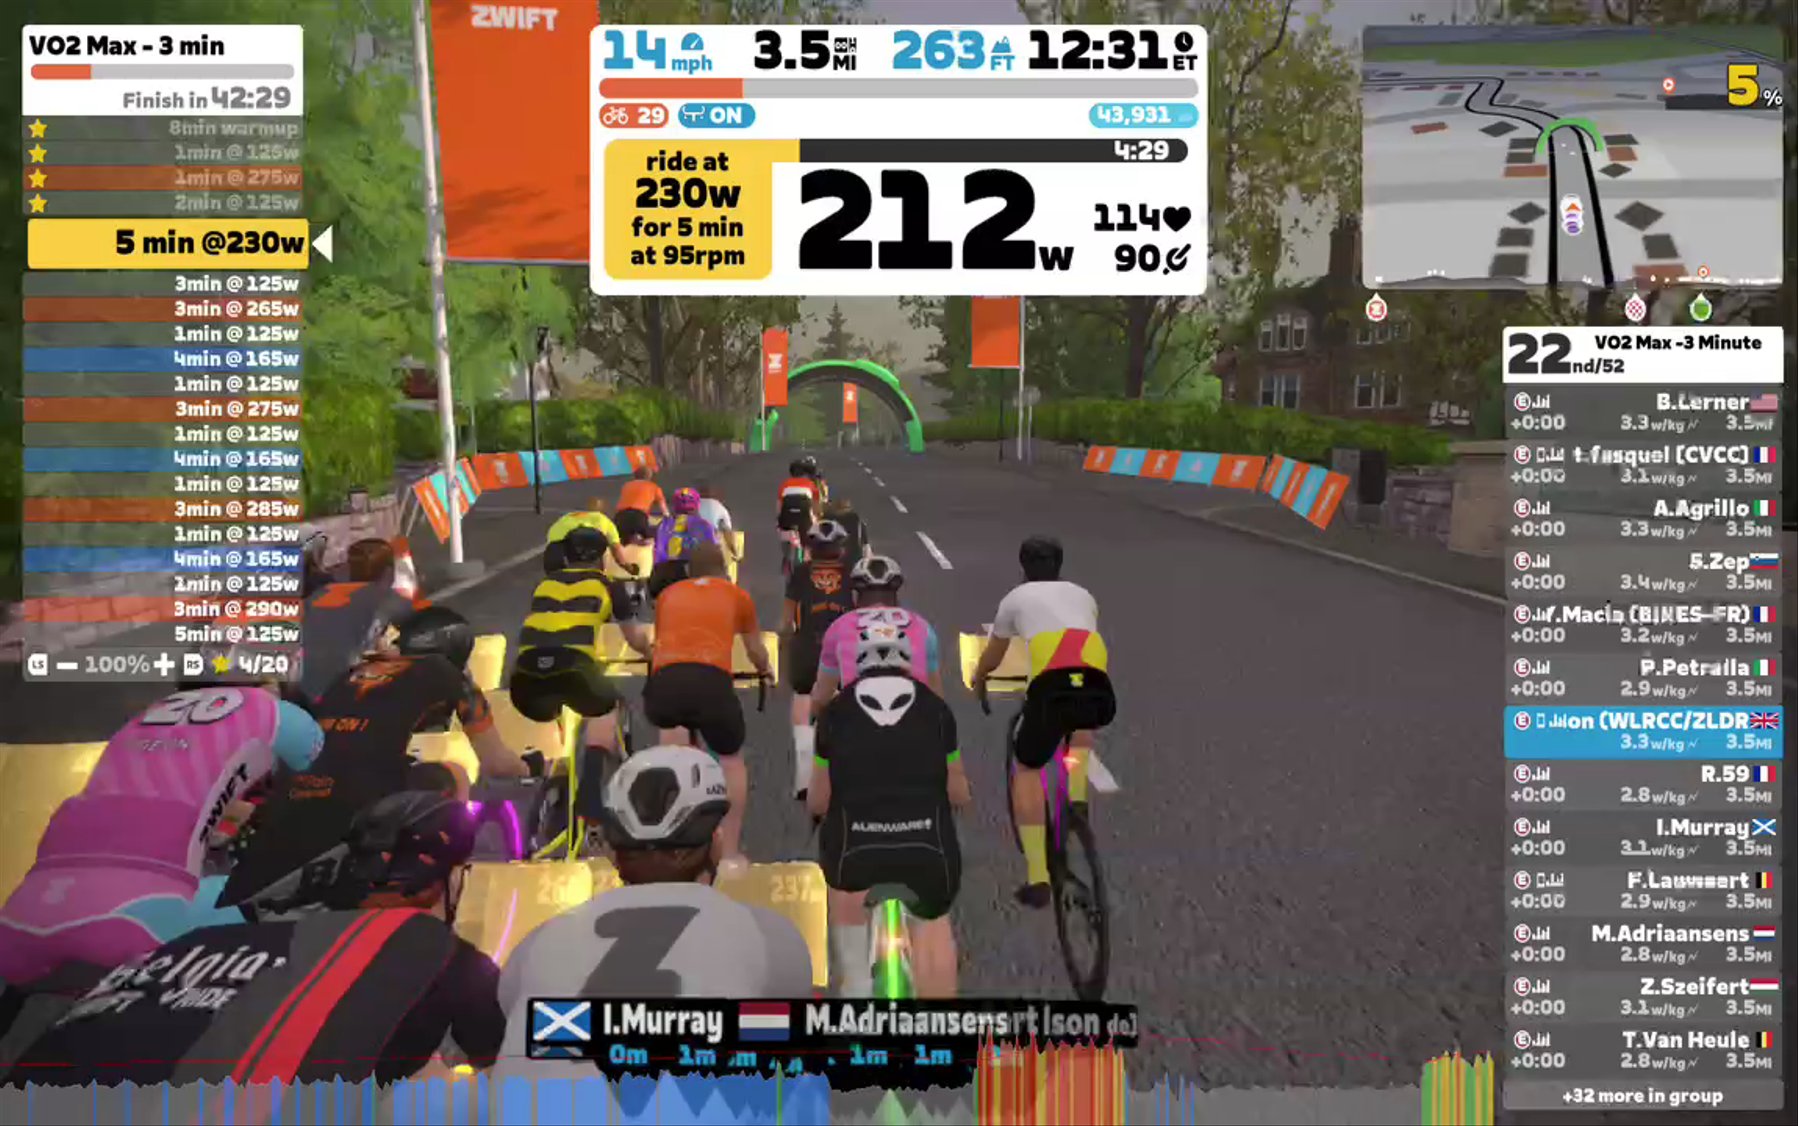 Zwift - Group Workout: VO2 Max -3 Minute (E) on Queen's Highway in Yorkshire